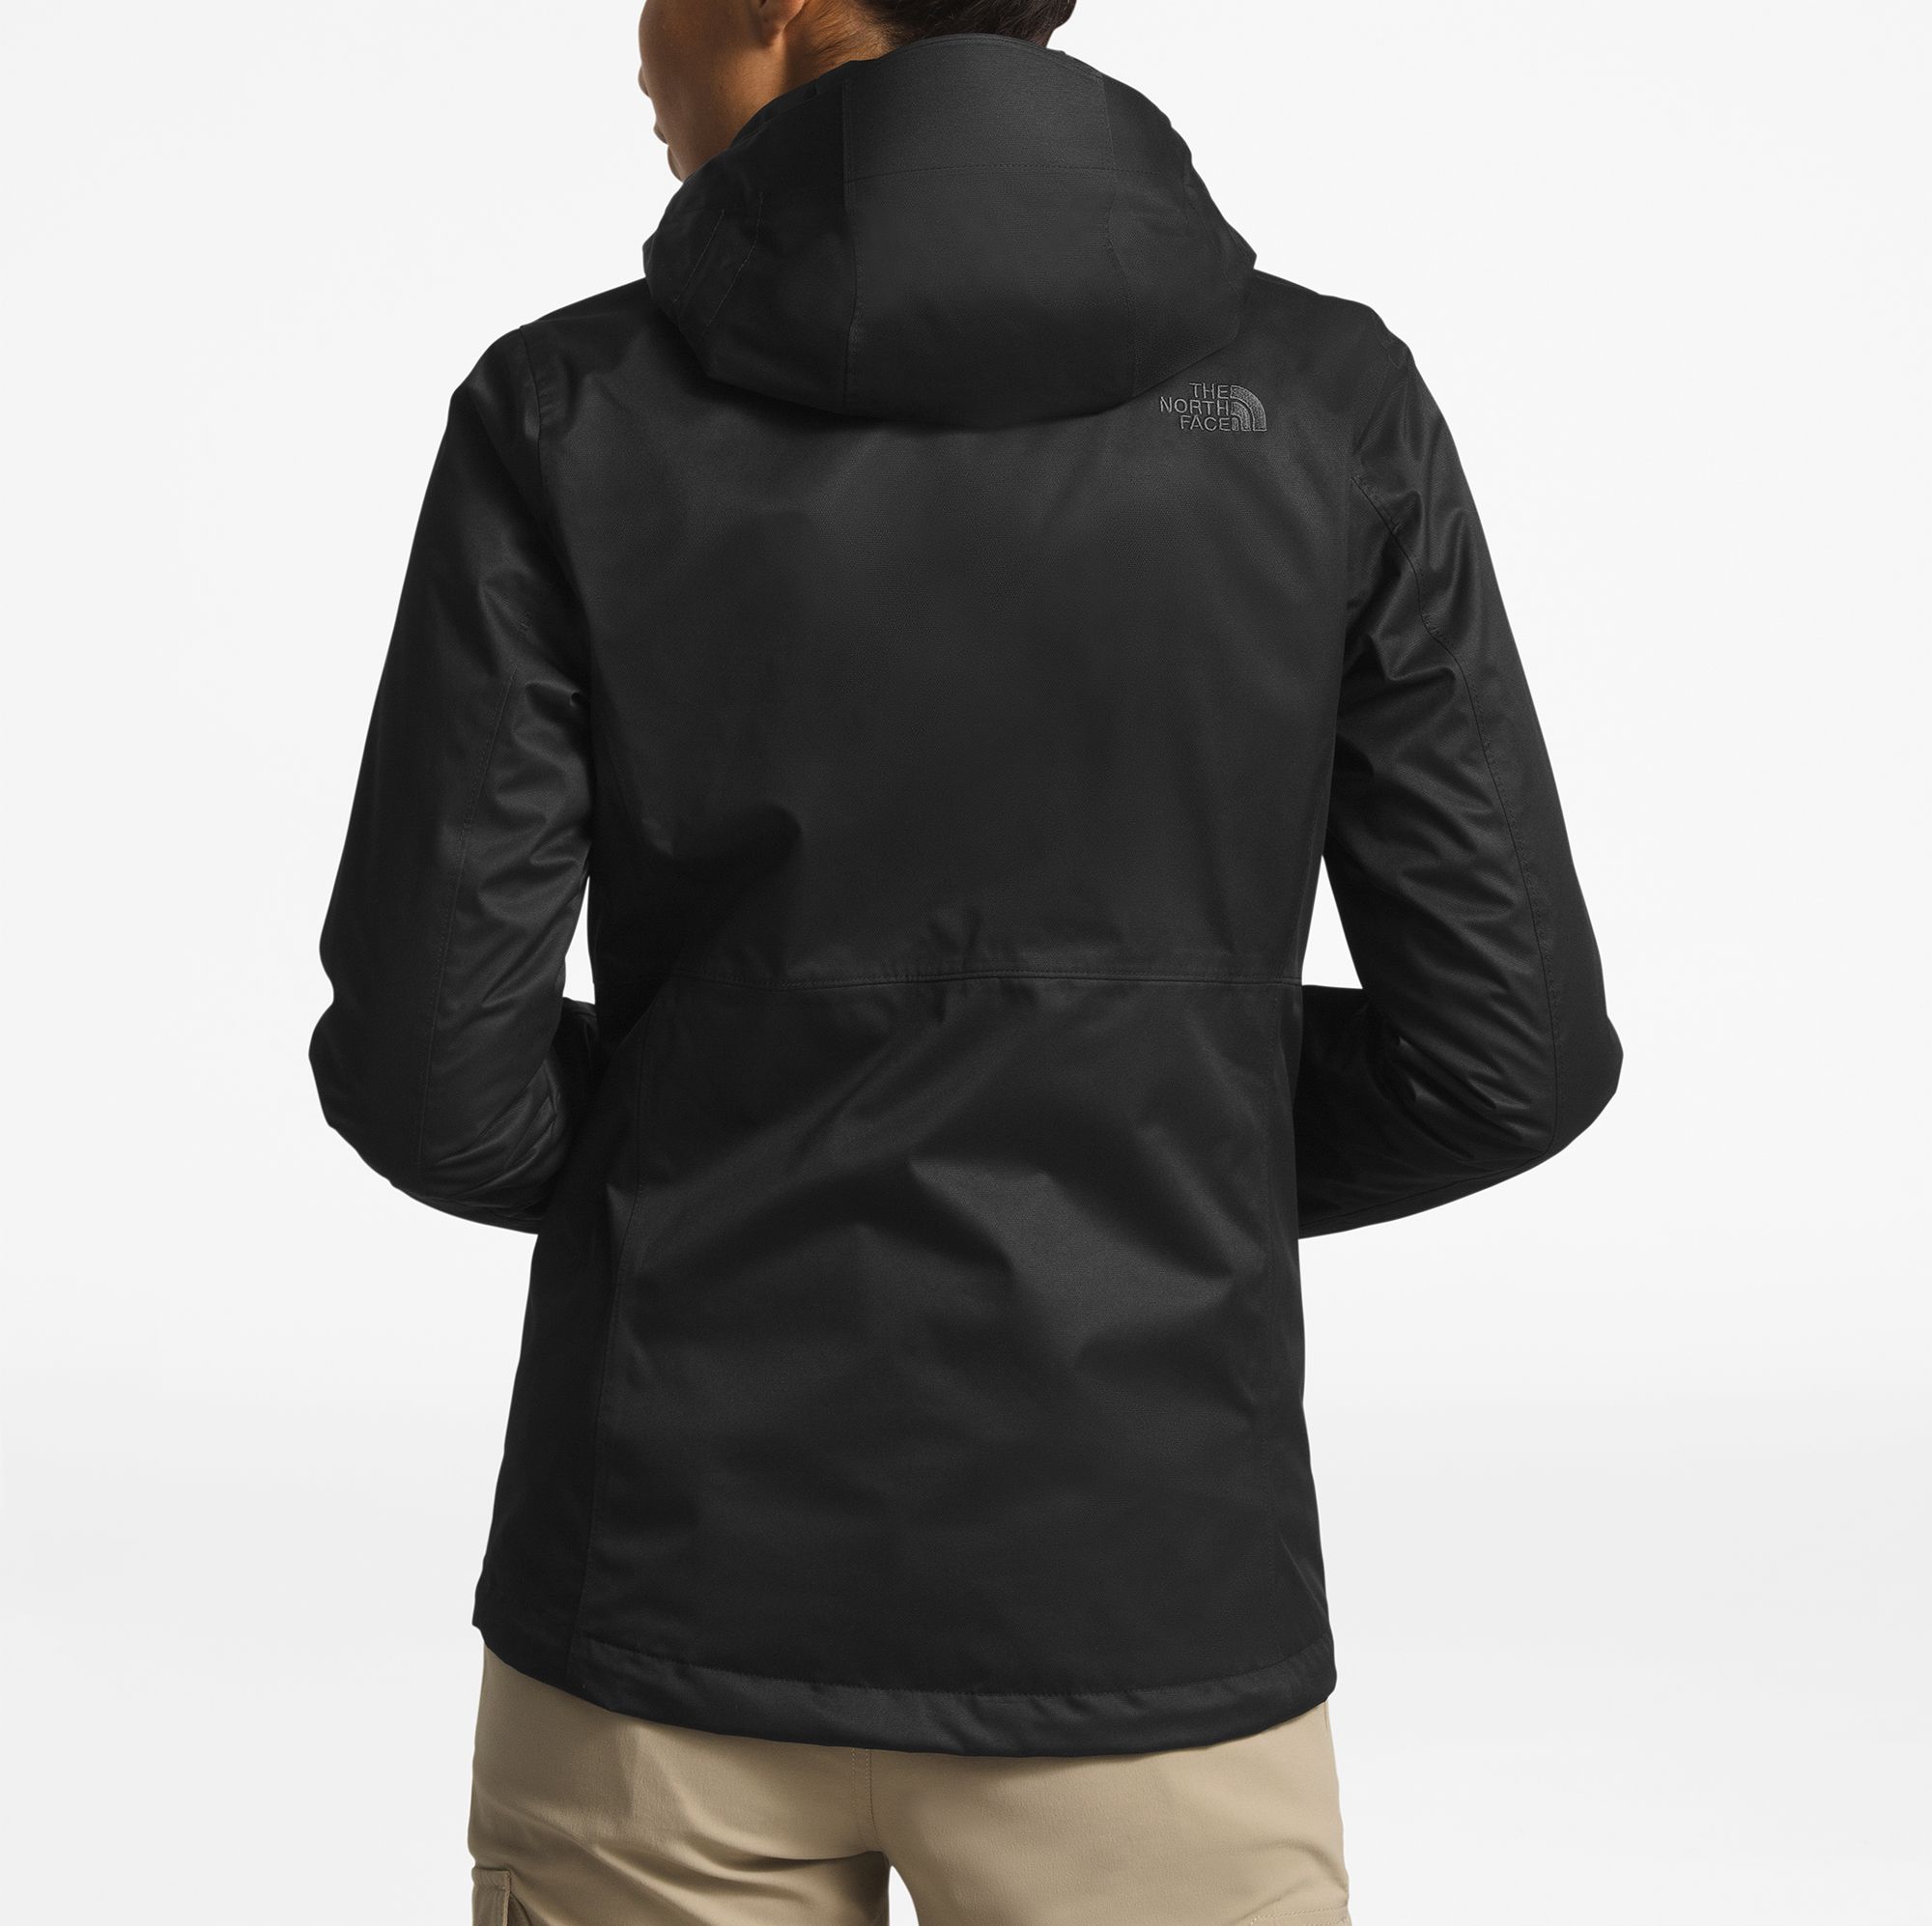 the north face arrowood